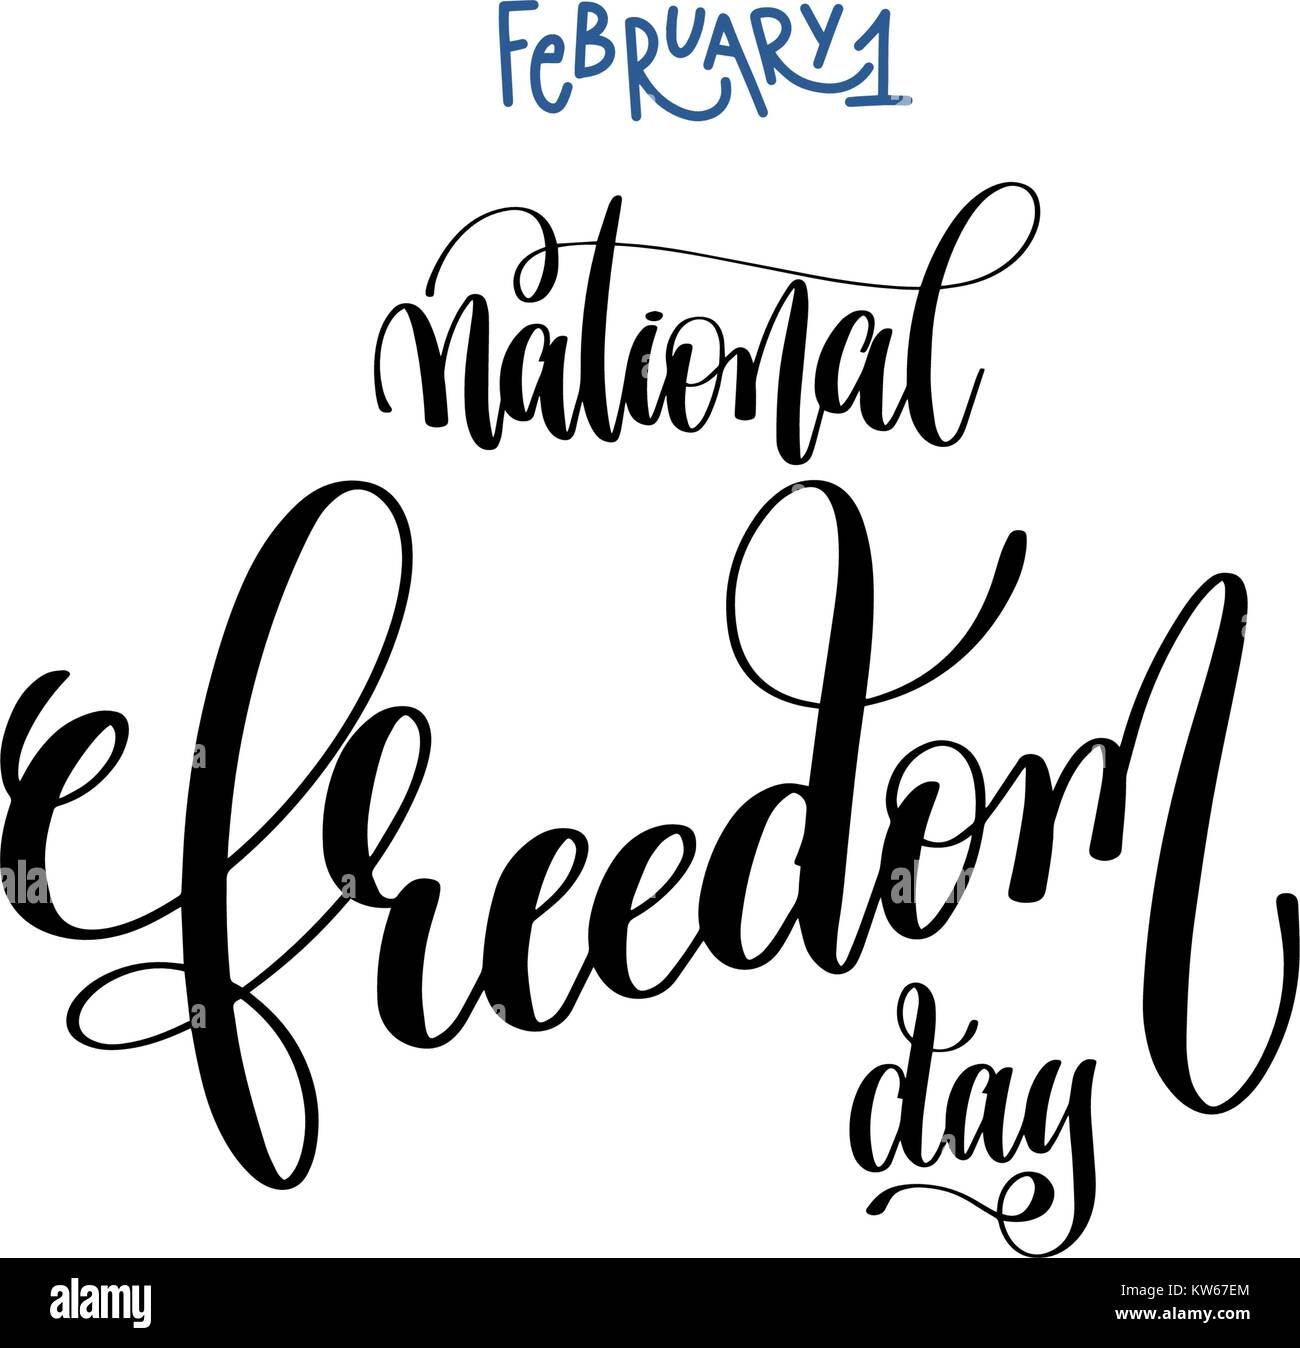 February 1 National Freedom Day Hand Lettering Inscription T Stock Vector Image Art Alamy